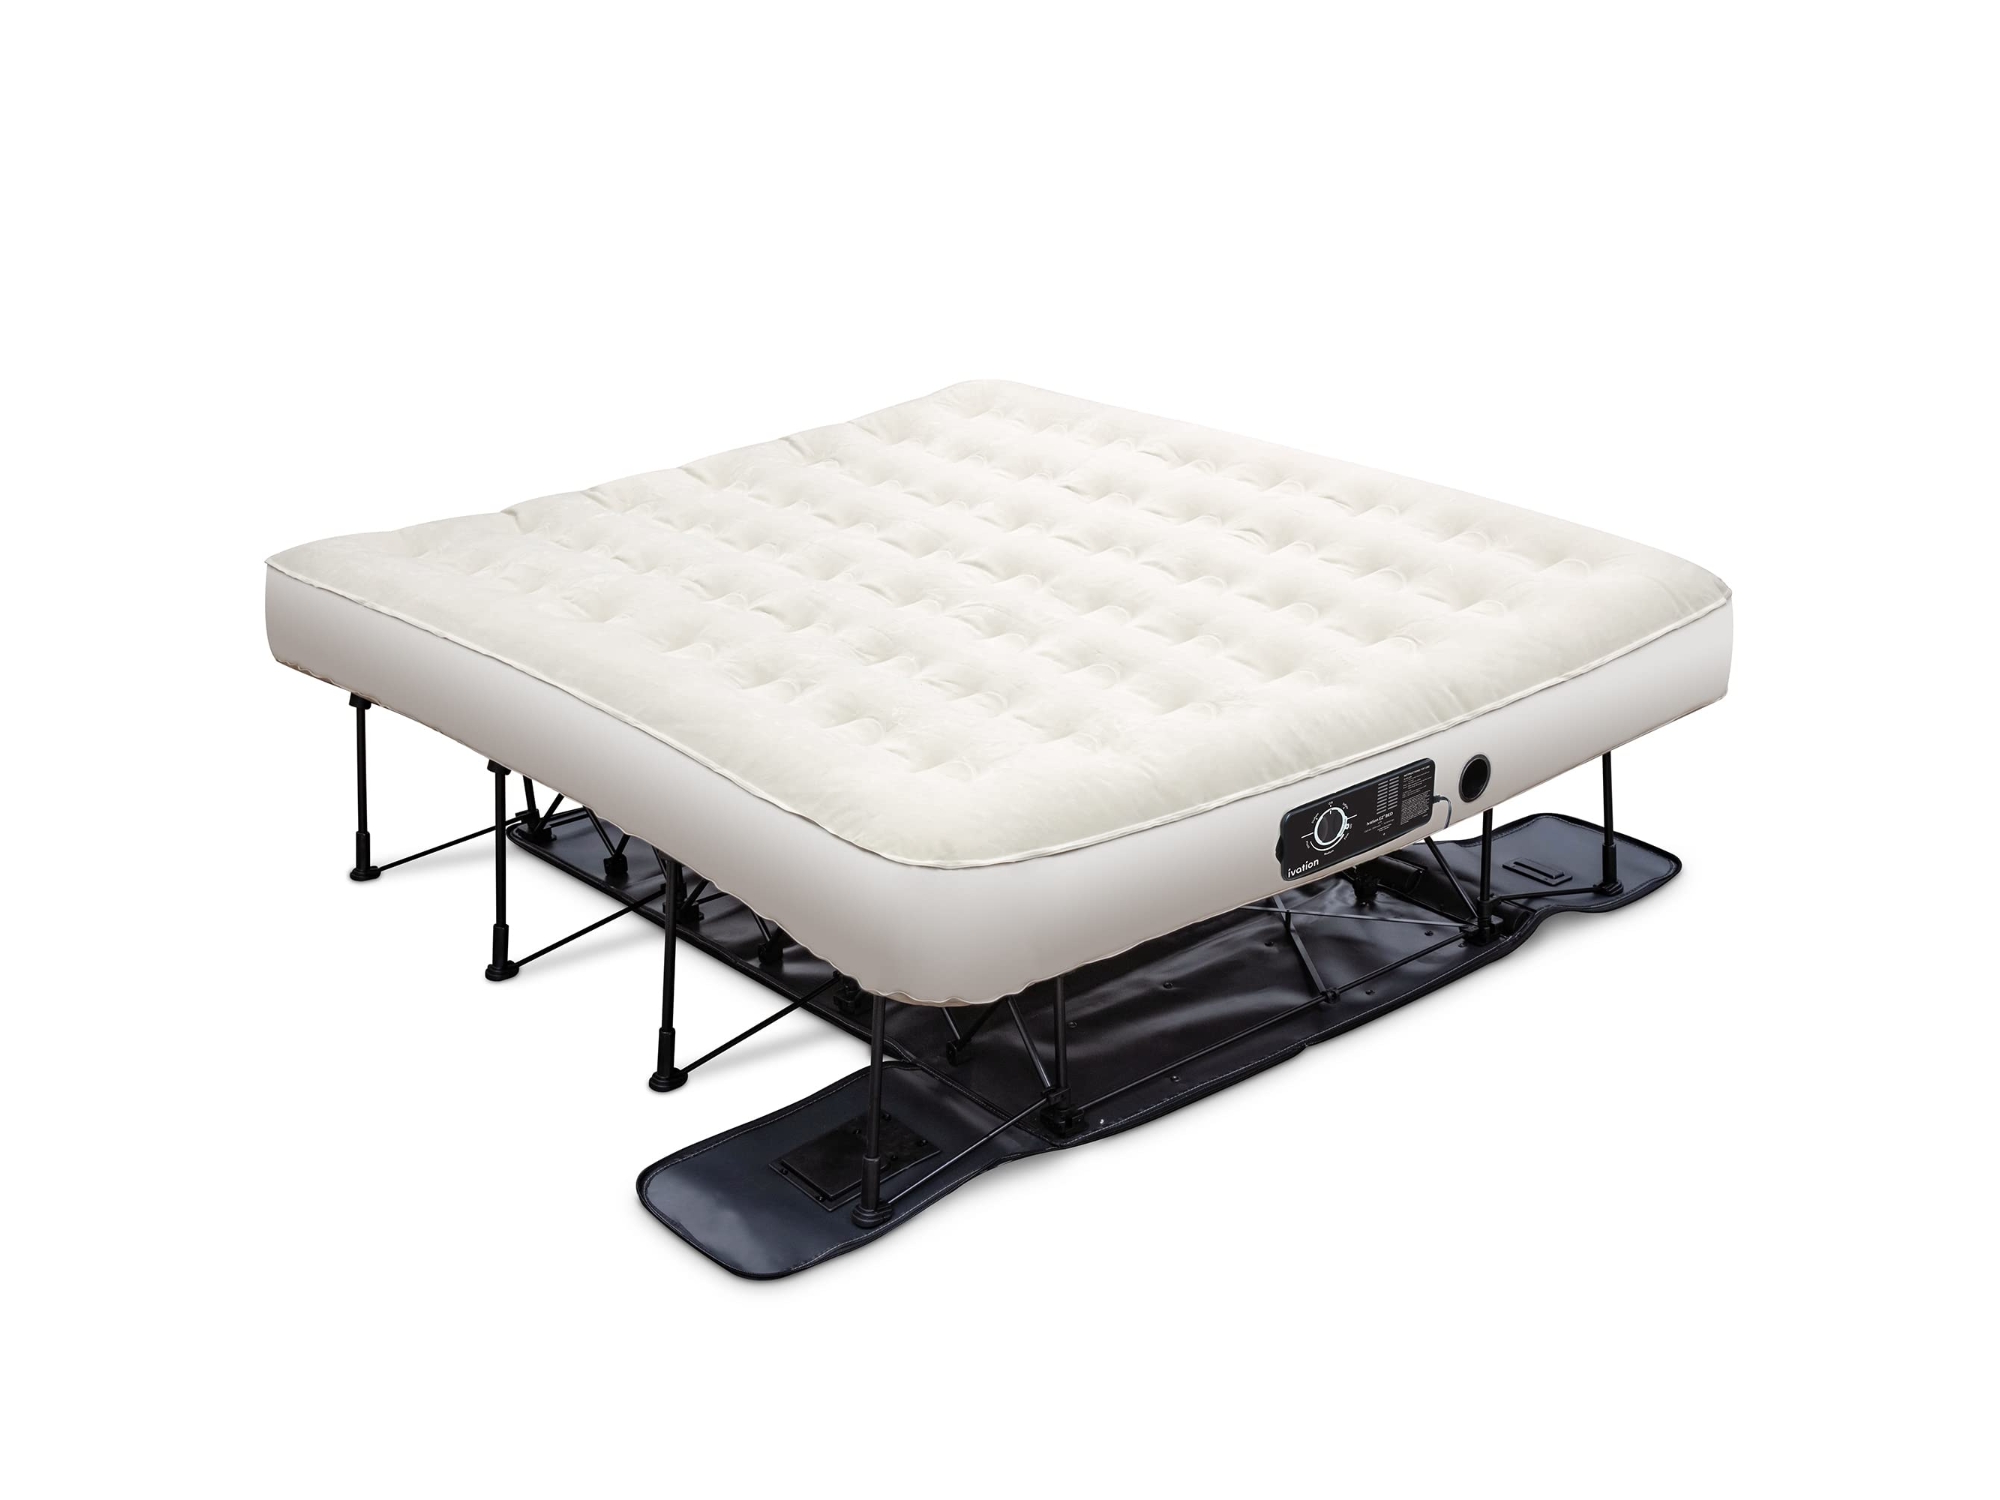 Image of Ivation Air Mattress with Built in Pump King Size Inflatable Mattress ID 843812162333